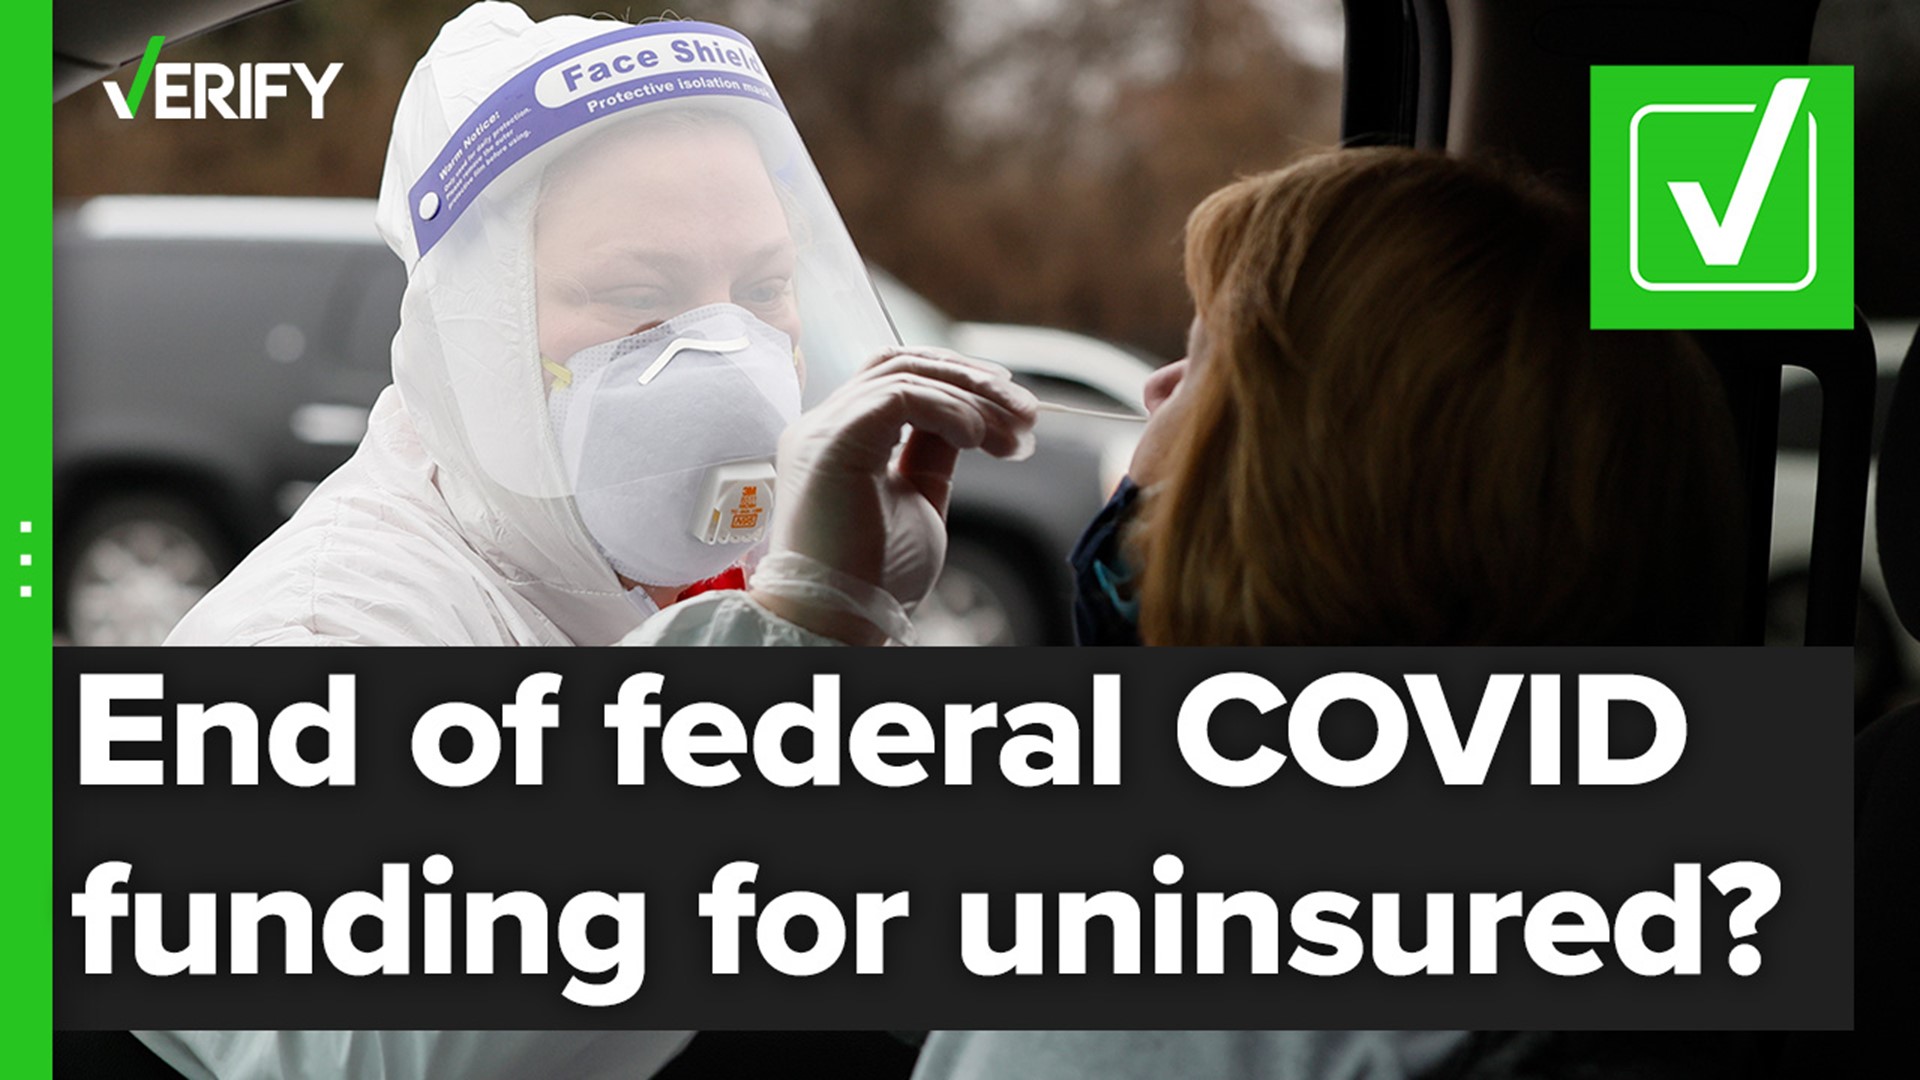 A federal program that reimburses providers has already stopped accepting claims for COVID-19 testing and treatment for uninsured Americans.